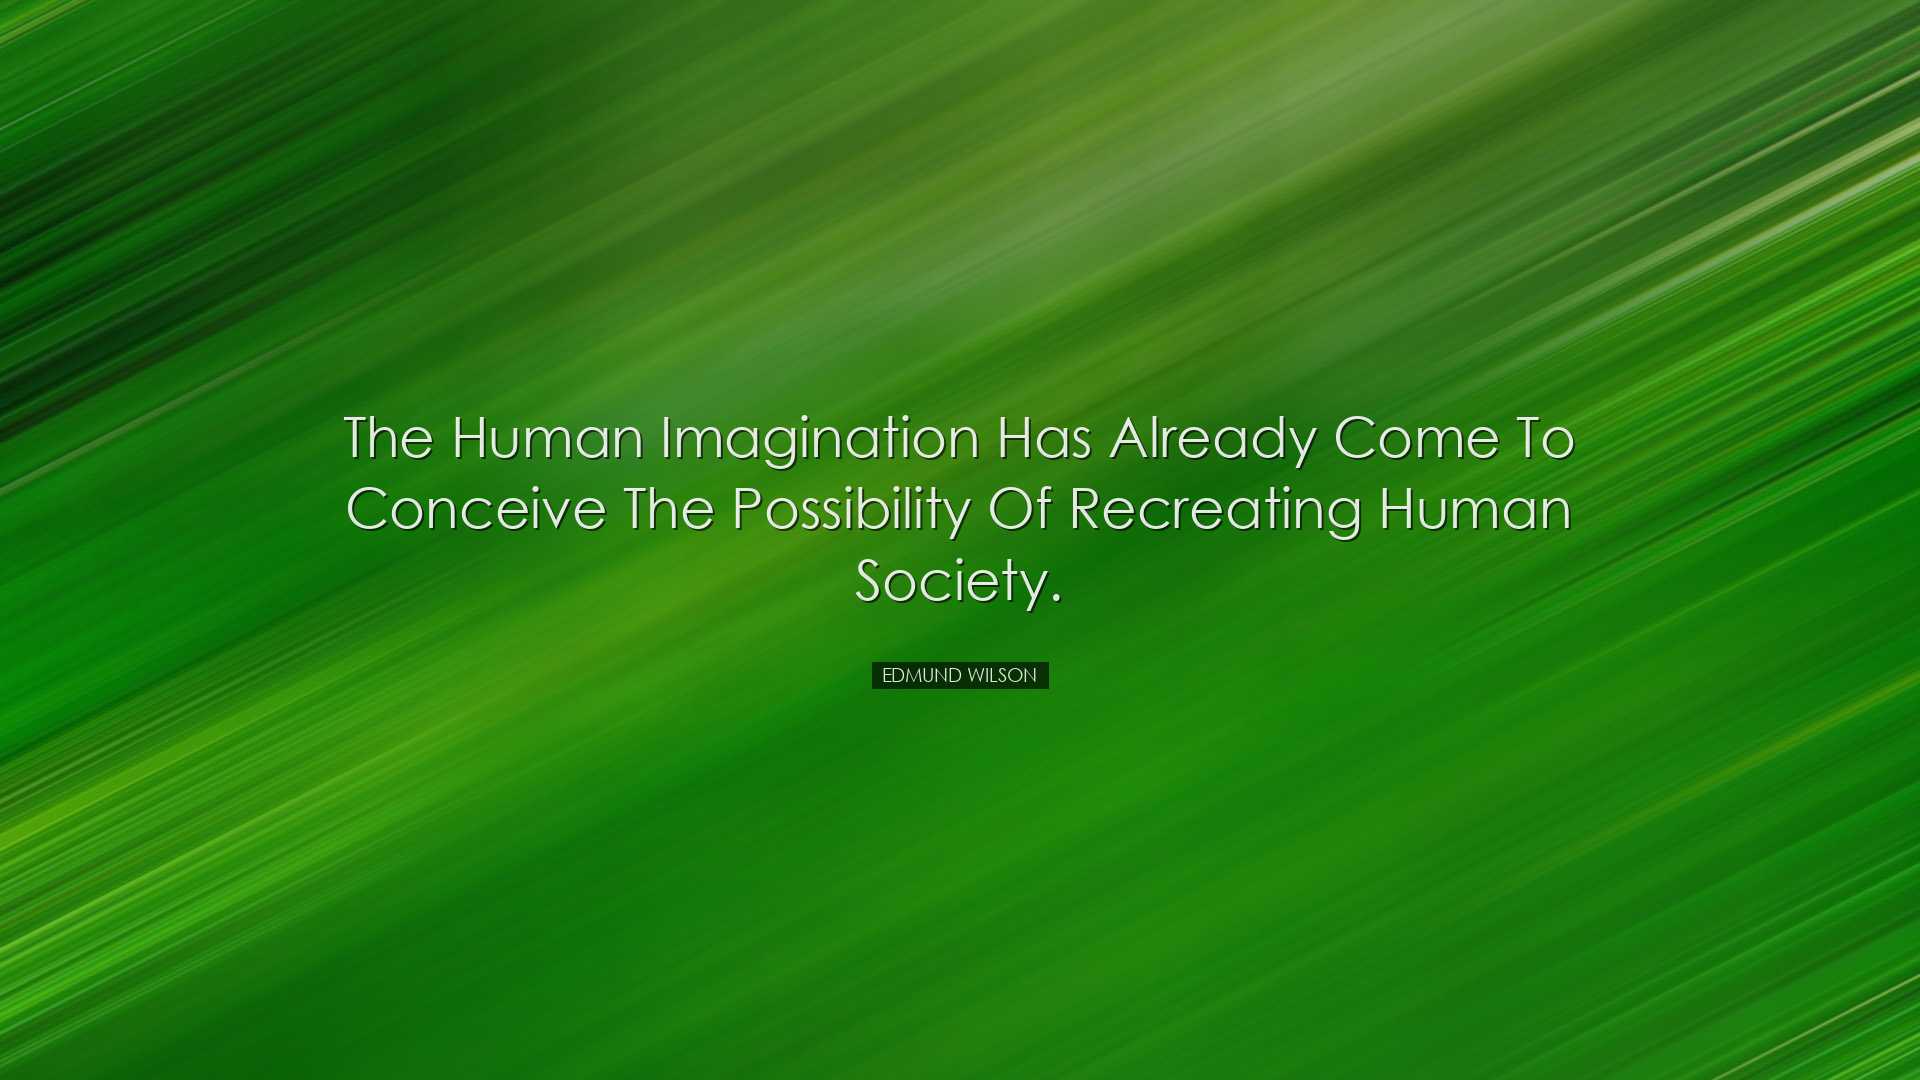 The human imagination has already come to conceive the possibility